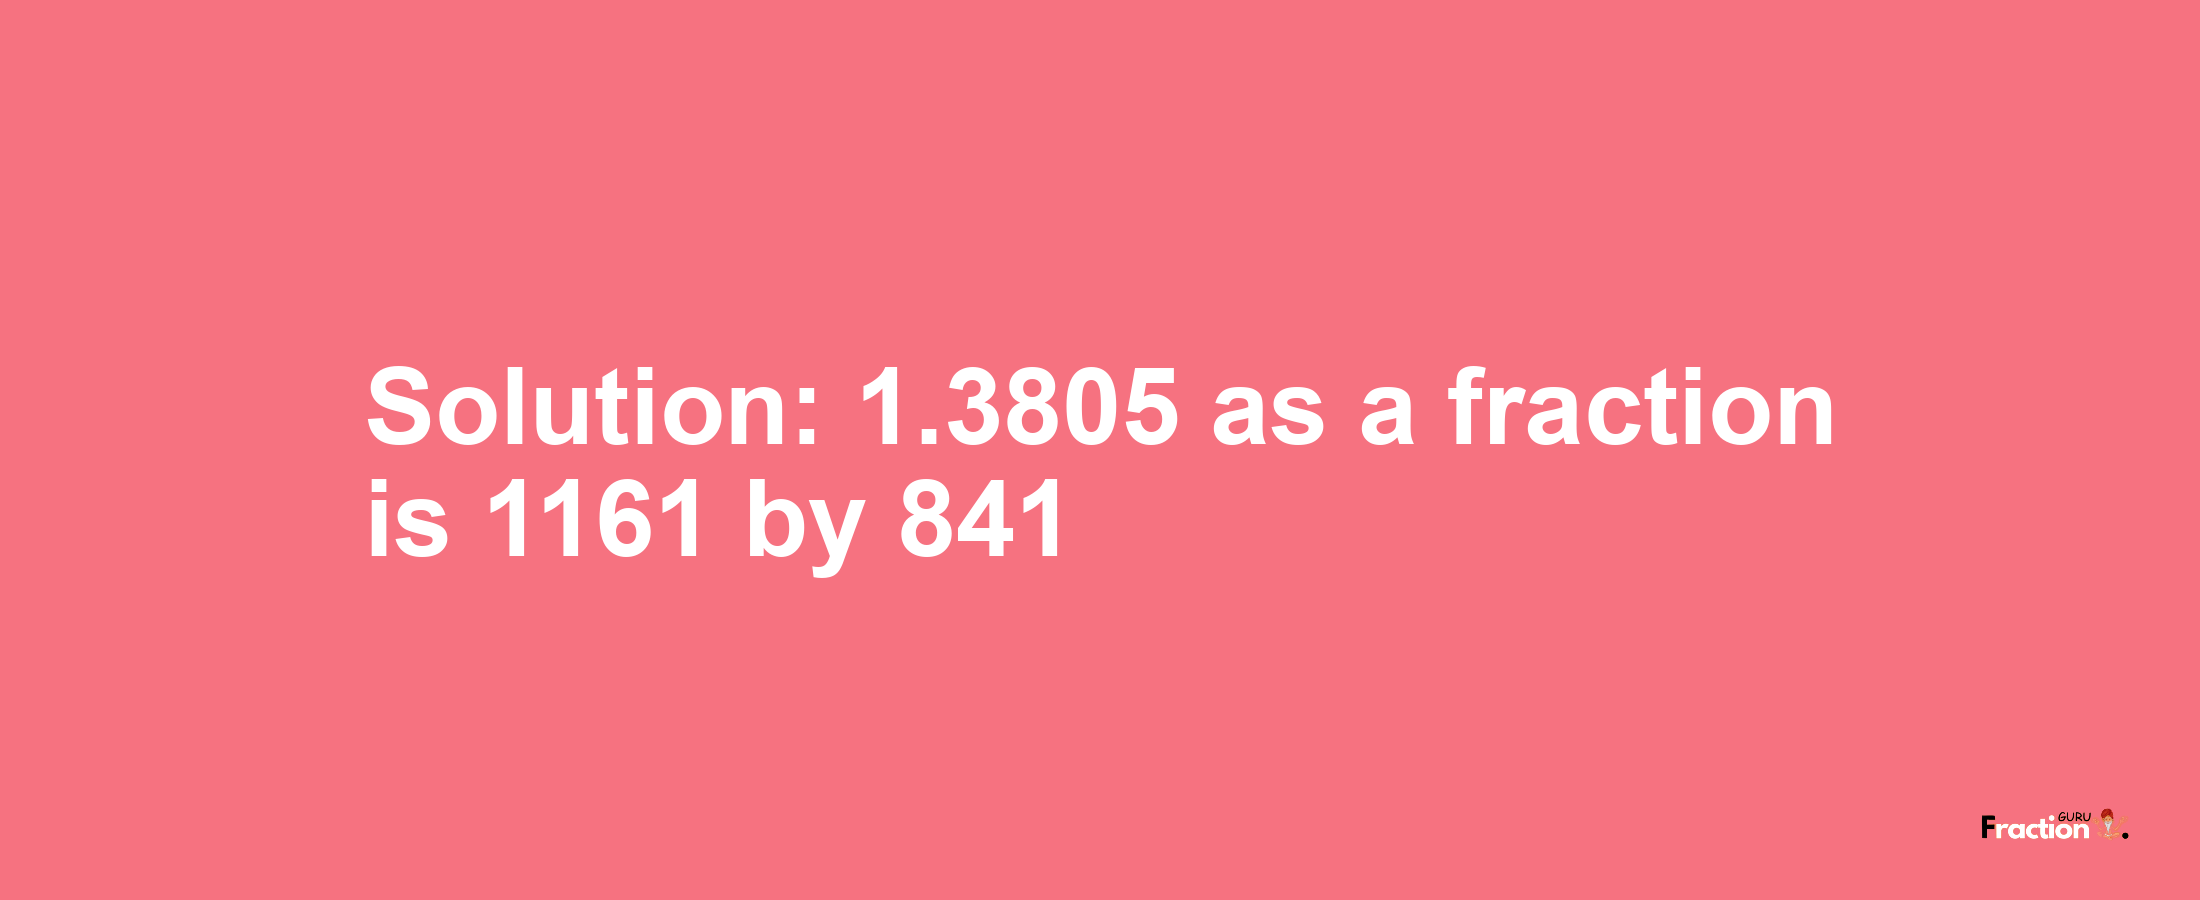 Solution:1.3805 as a fraction is 1161/841